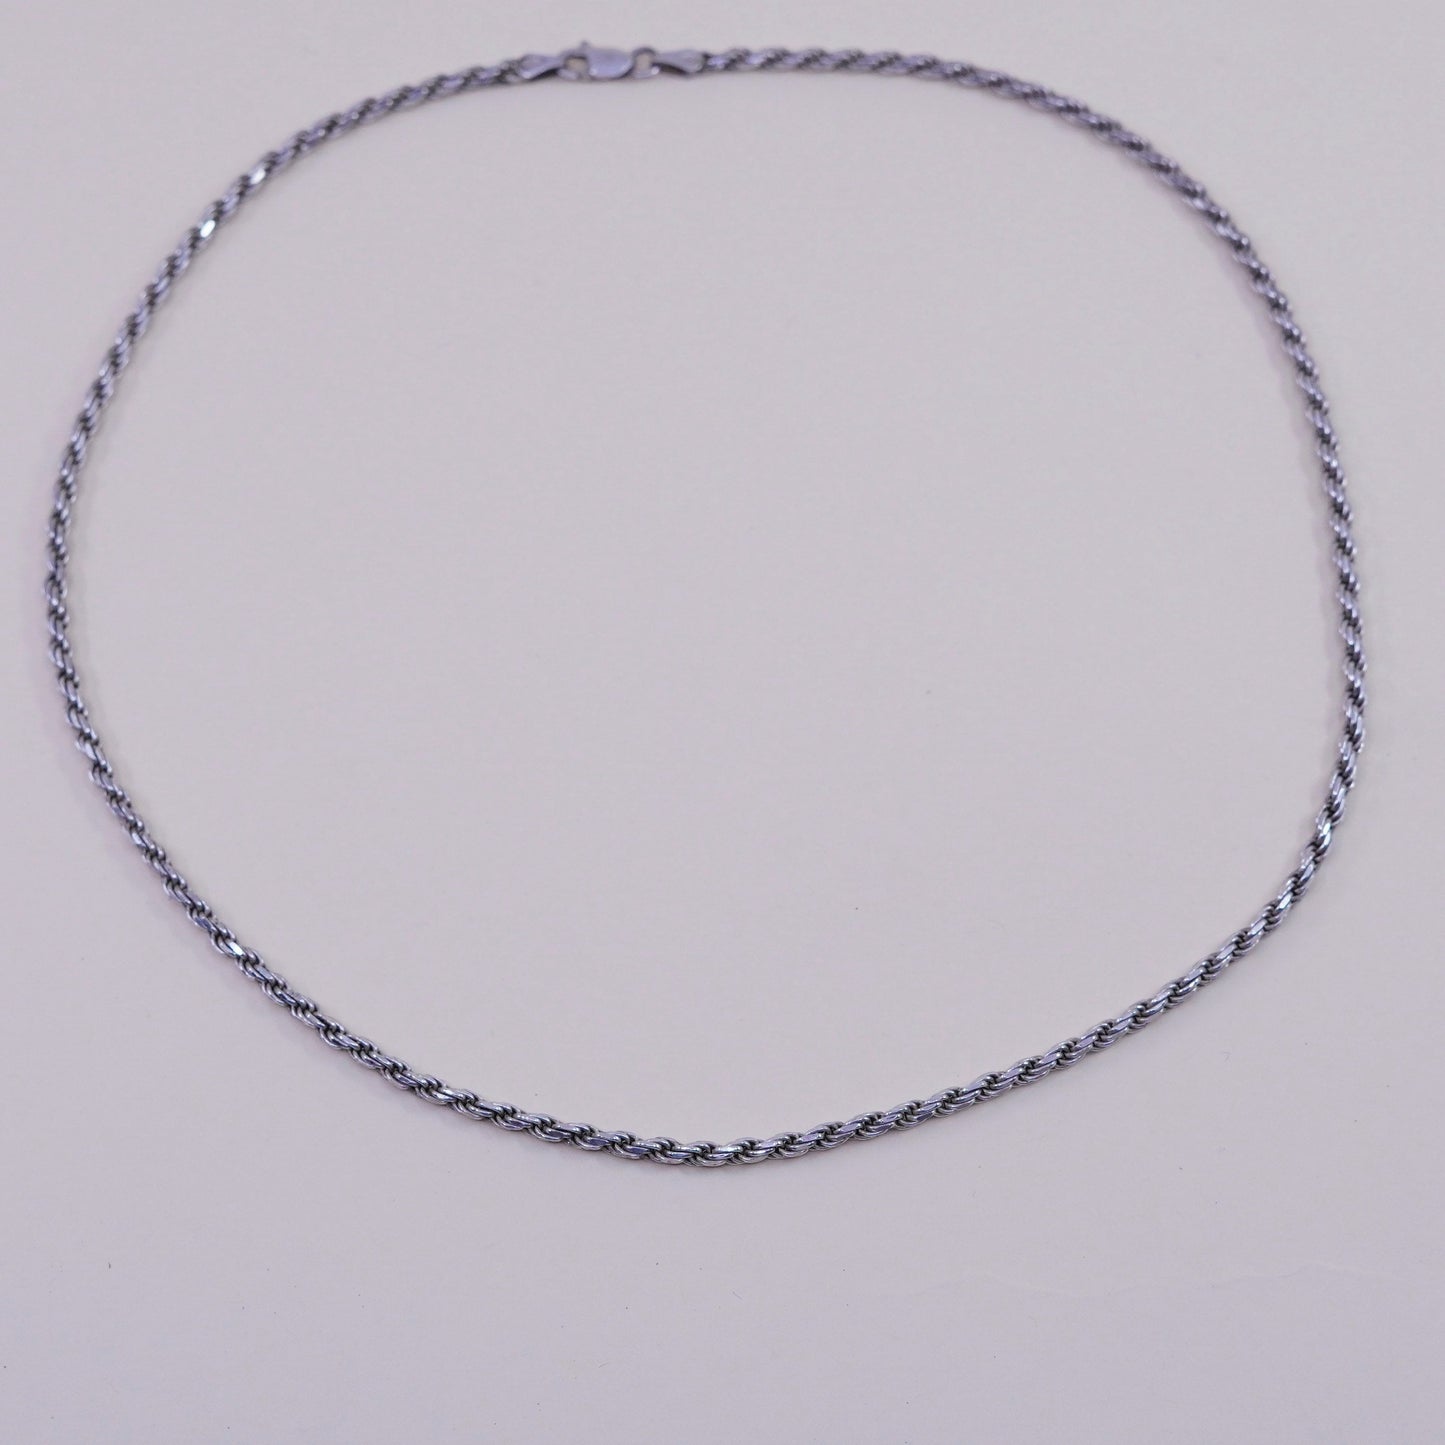 18”, 3mm, vintage Sterling silver necklace, Italy 925 diamond rope chain